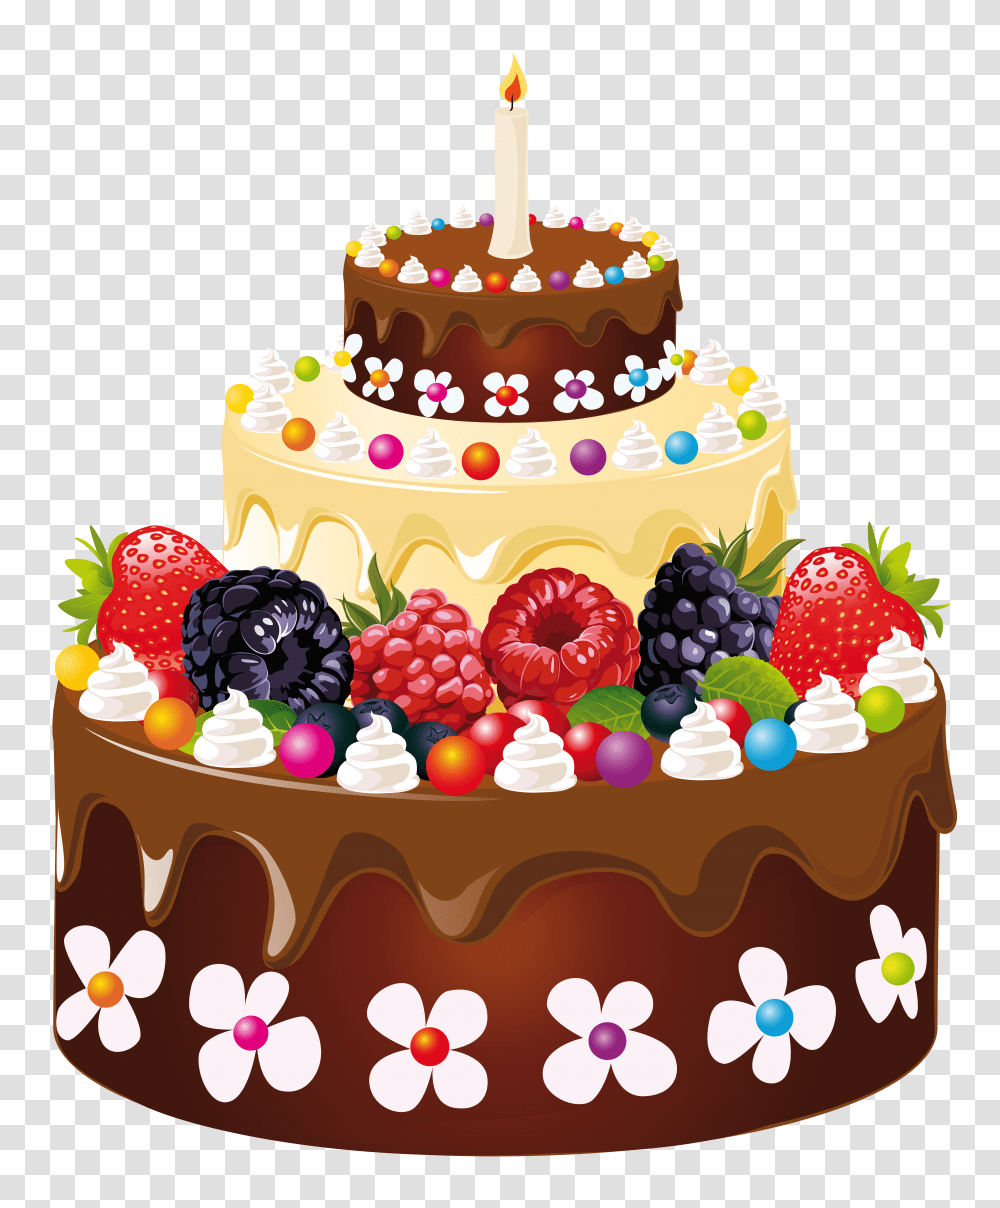 Birthday Cake With Candle Clipart Image Tarta De Birthday Cake Images Hd, Dessert, Food, Torte, Wedding Cake Transparent Png